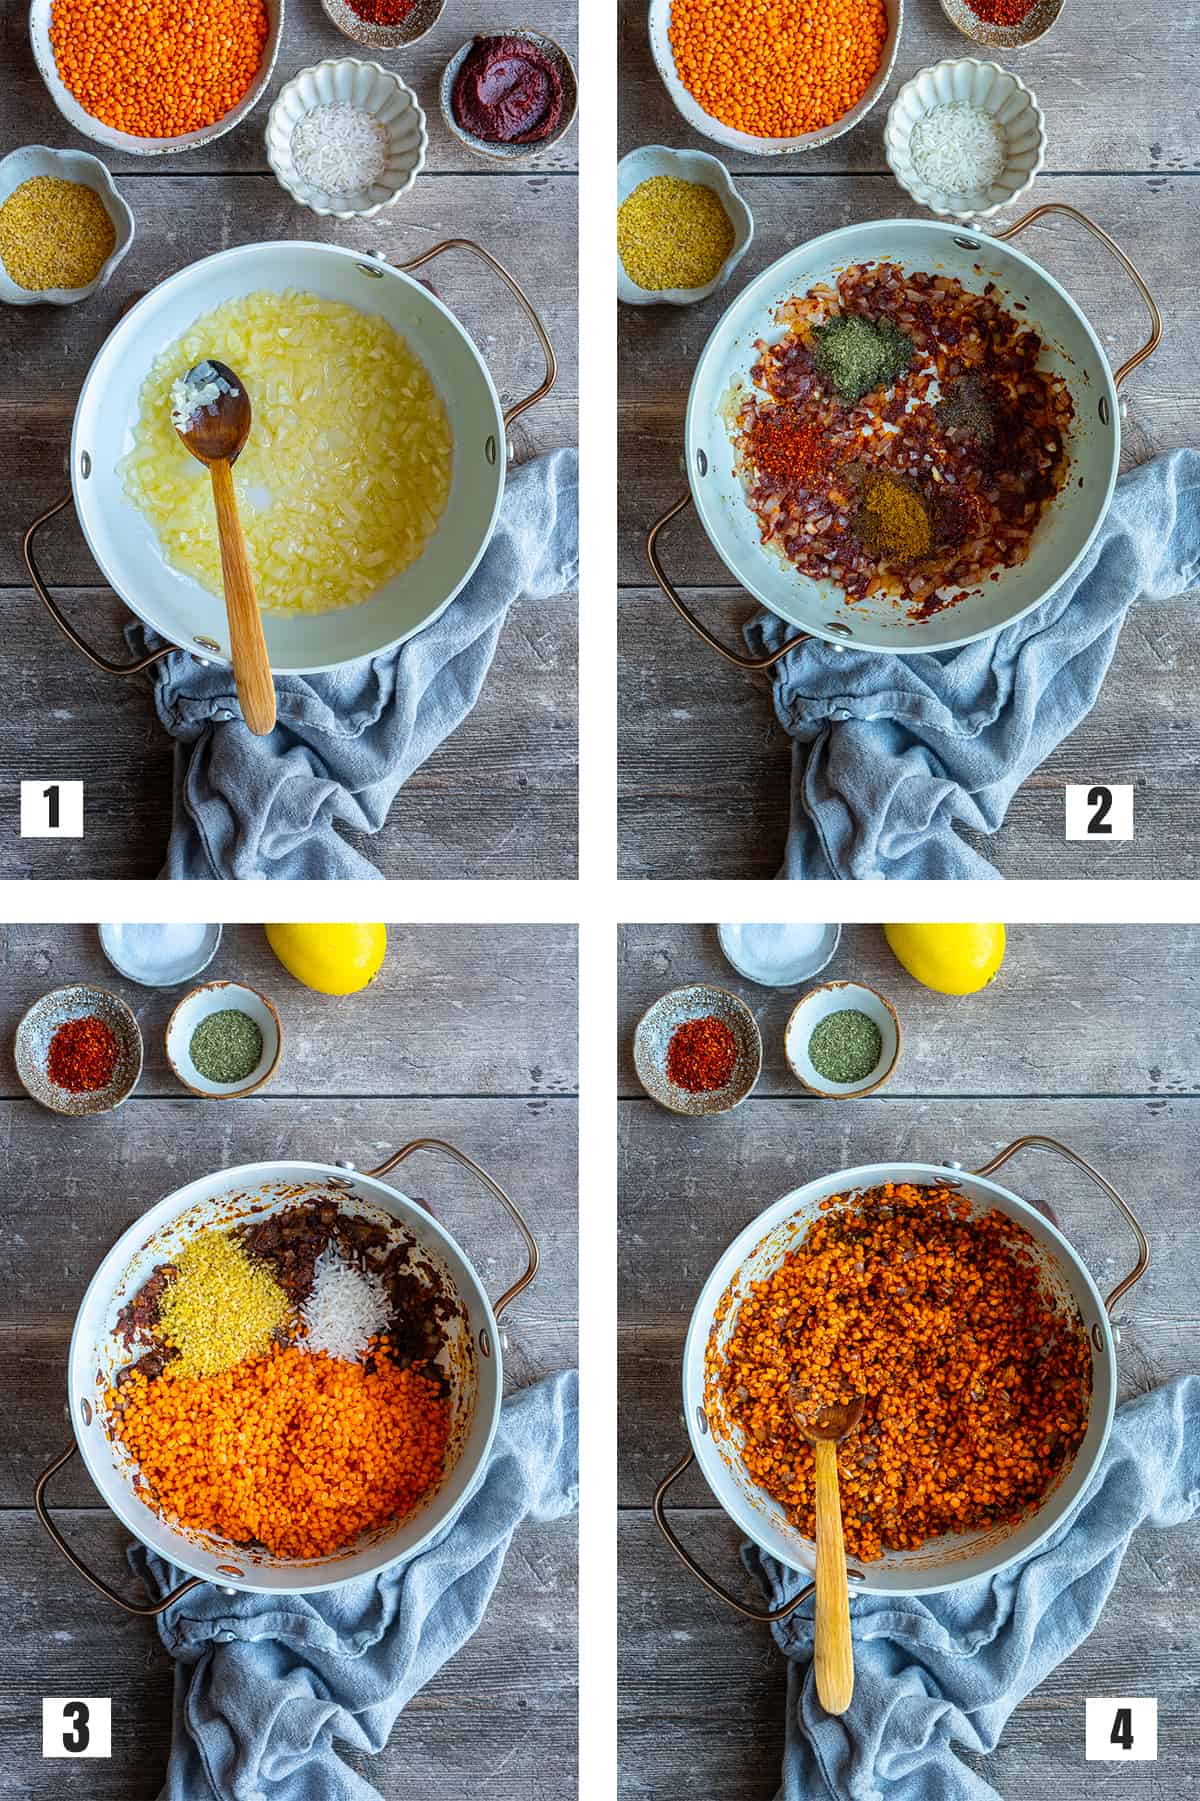 A collage of four pictures showing the steps of making Ezogelin soup.